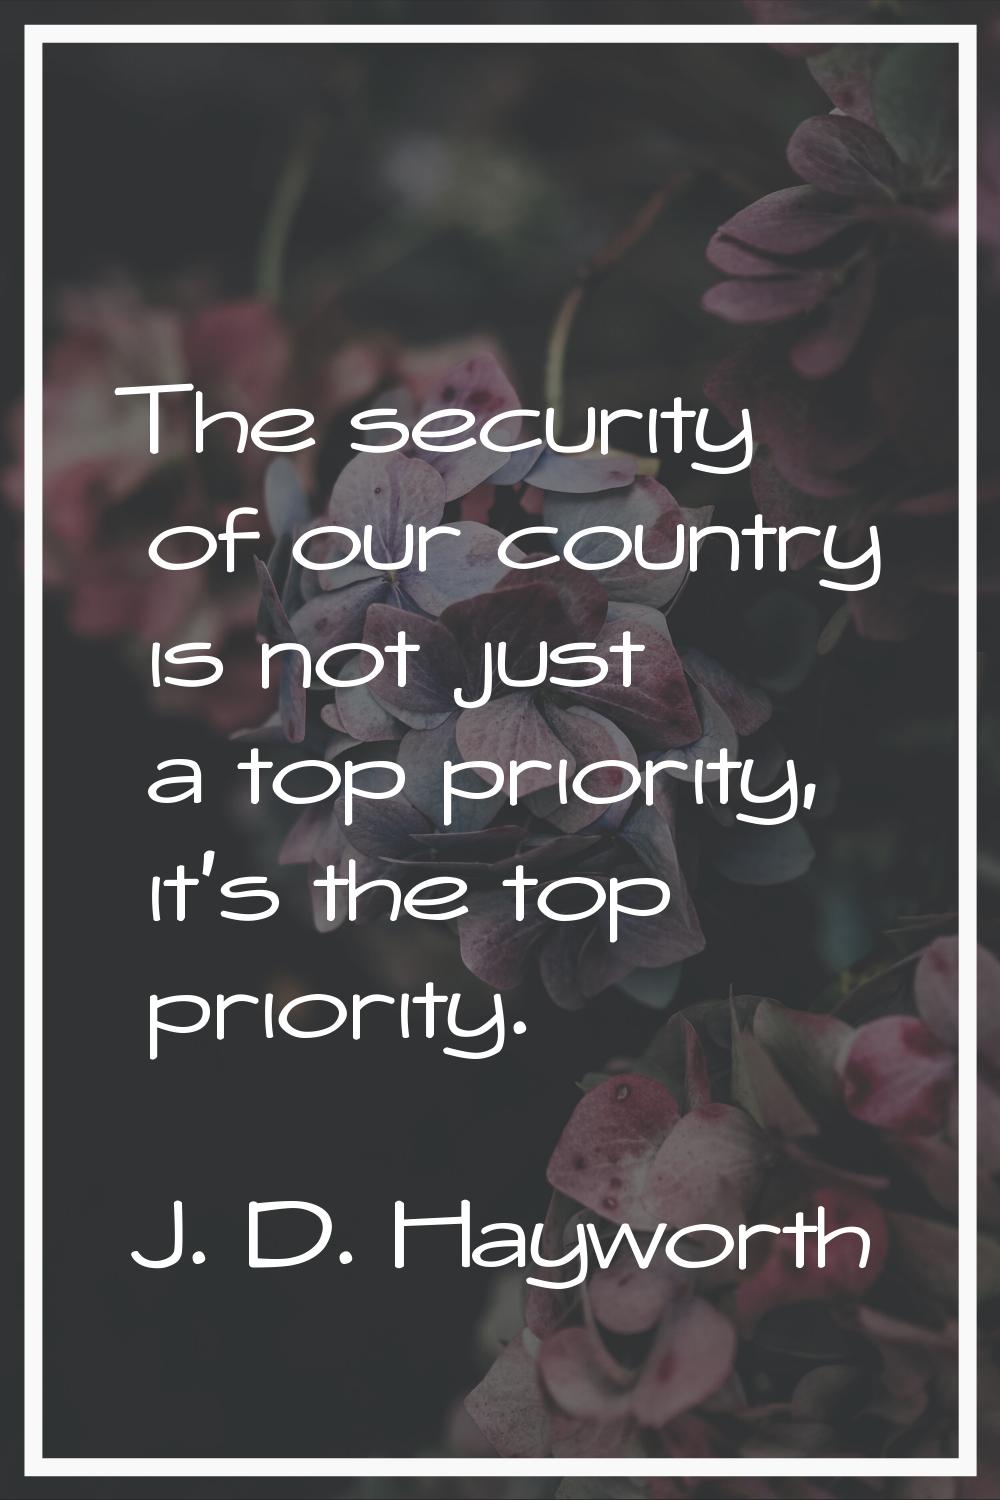 The security of our country is not just a top priority, it's the top priority.